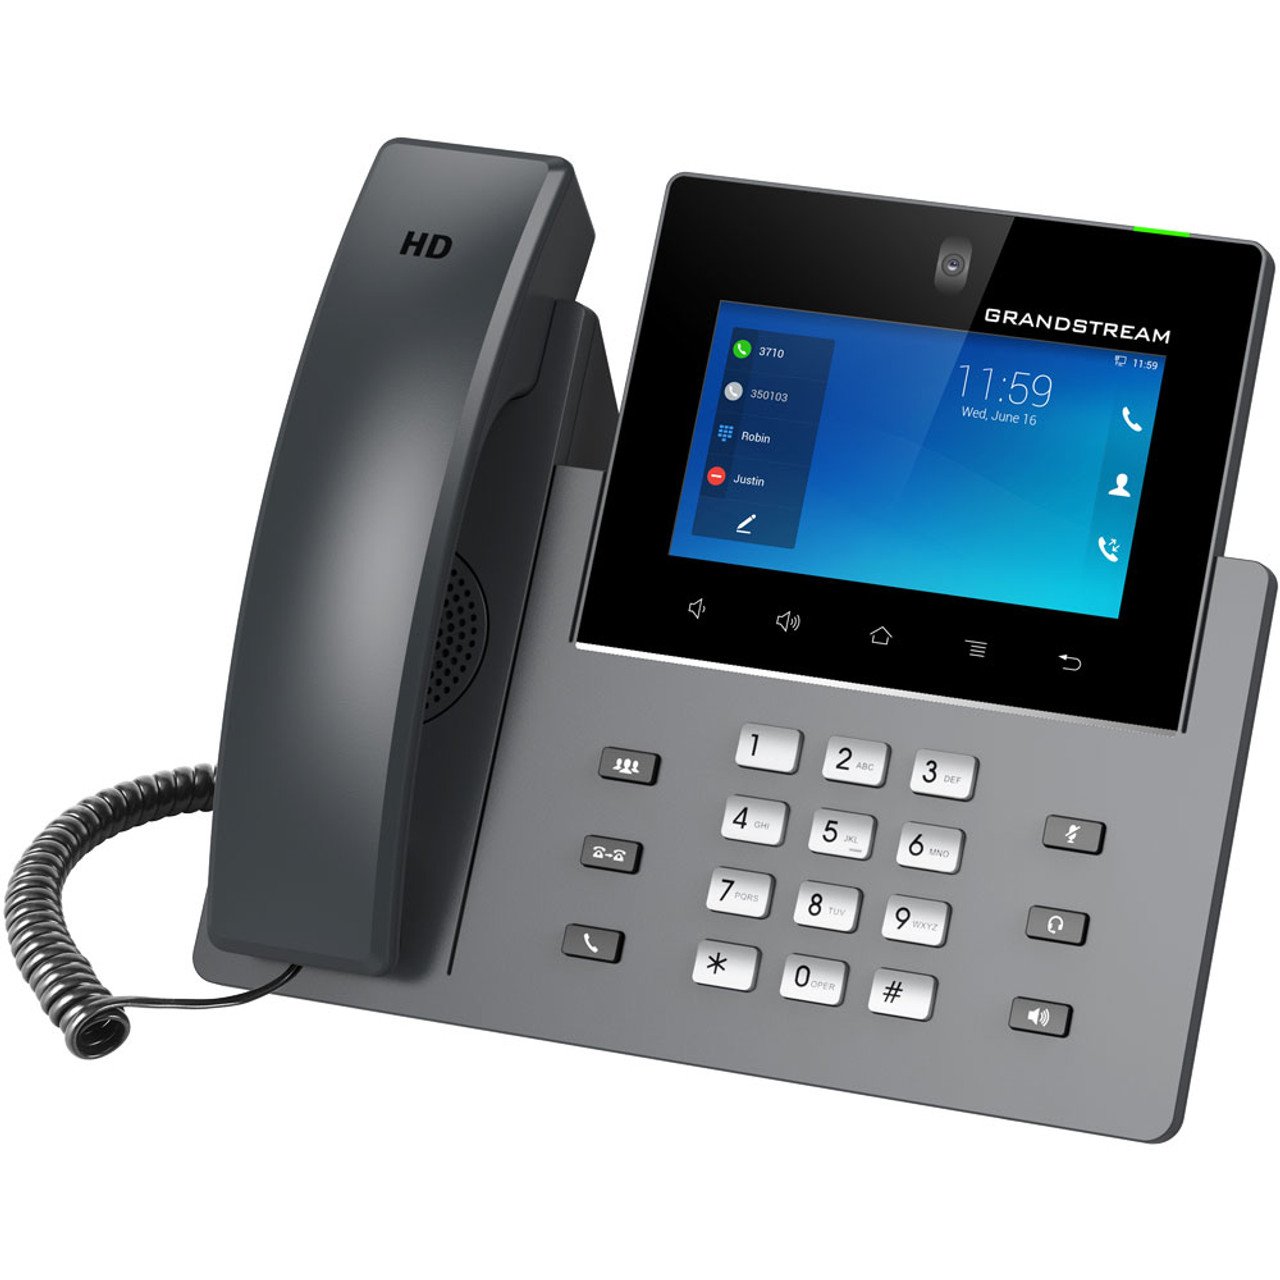 Grandstream GXV3450 Android IP Video Phone left